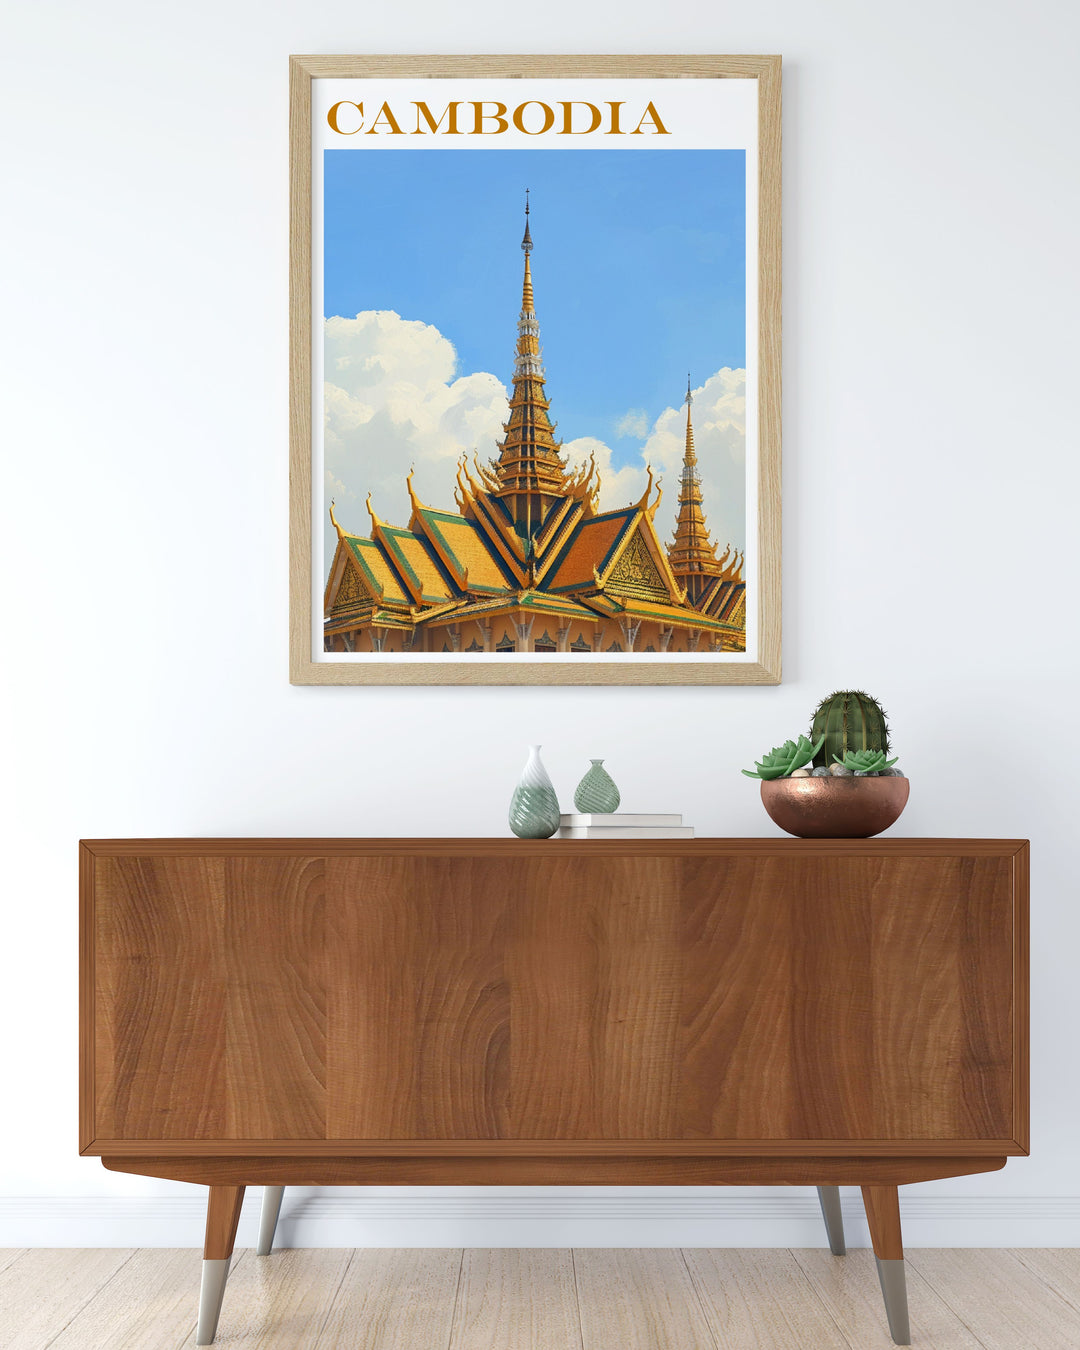 Unique Cambodia poster showcasing Royal Palace in a classic black and white vintage style ideal for history enthusiasts and art lovers alike.